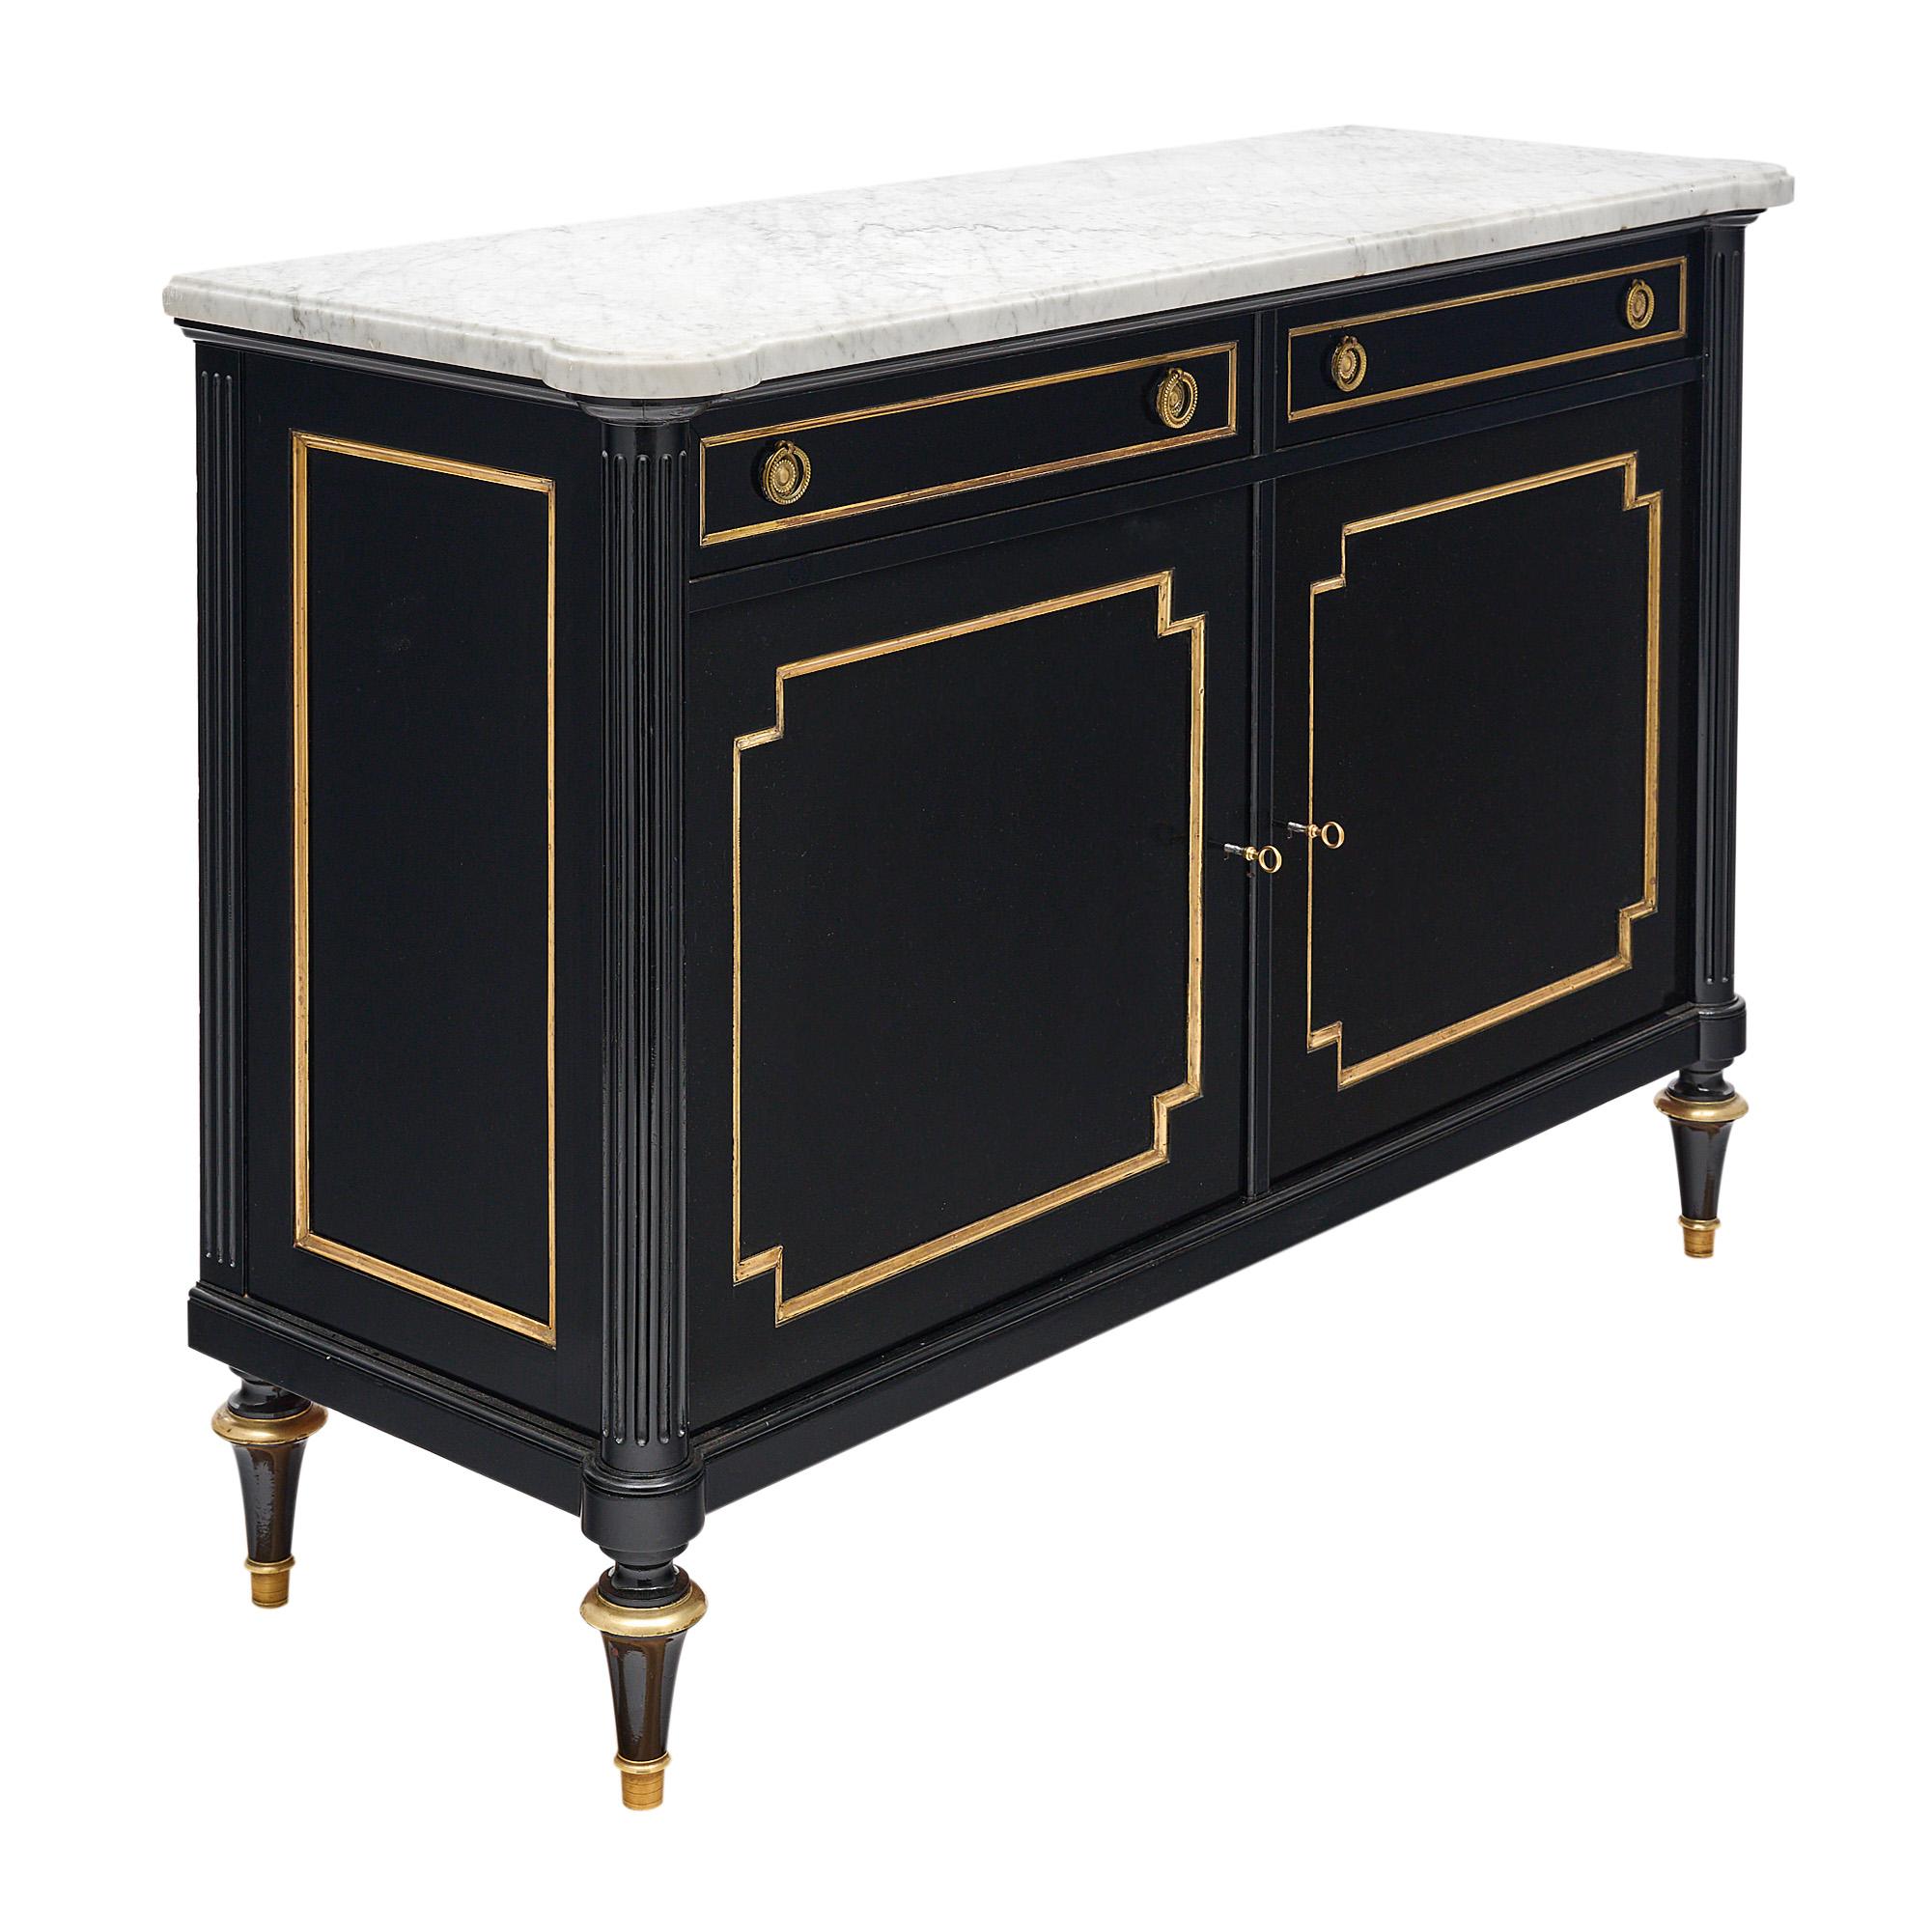 Buffet, French, in the Louis XVI style, of Mahogany, ebonized and finished in a lustrous Museum quality French polish, gilt brass throughout. Two dovetailed drawers and two doors opening to adjustable shelving, intact Carrara marble slab. The